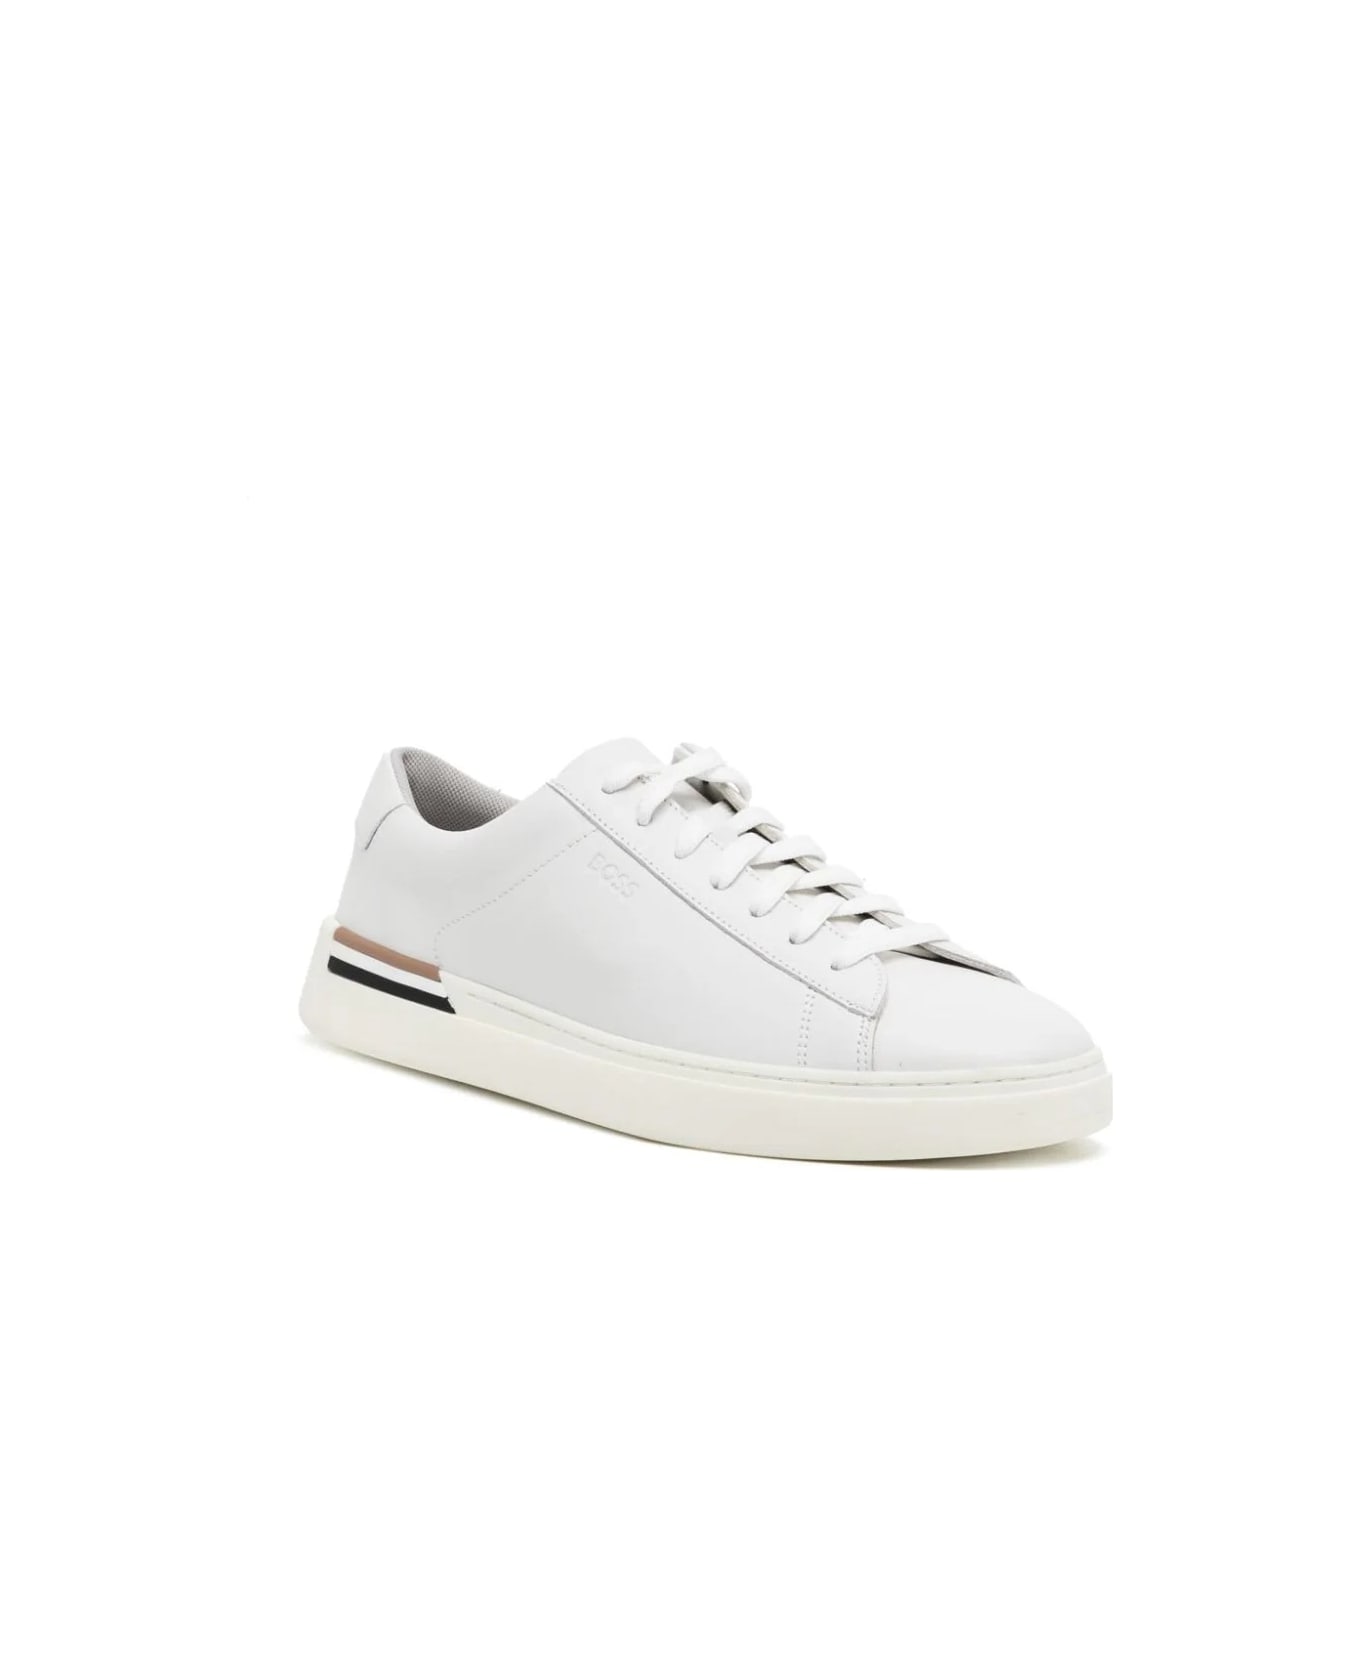 Hugo Boss White Leather Sneakers With Preformed Sole, Logo And Typical Brand Stripes - White スニーカー